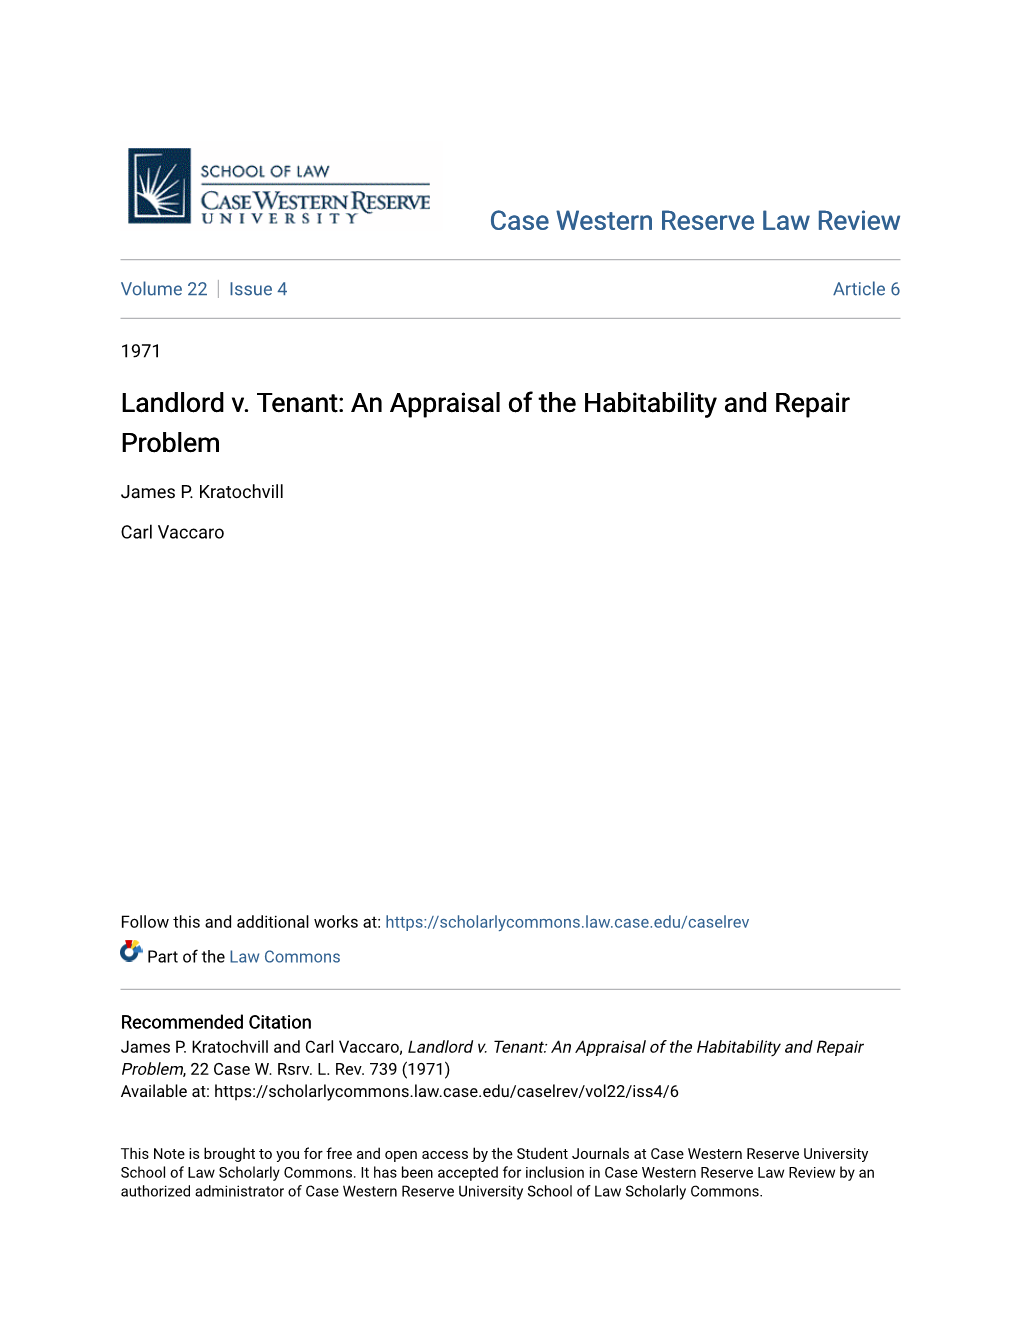 Landlord V. Tenant: an Appraisal of the Habitability and Repair Problem